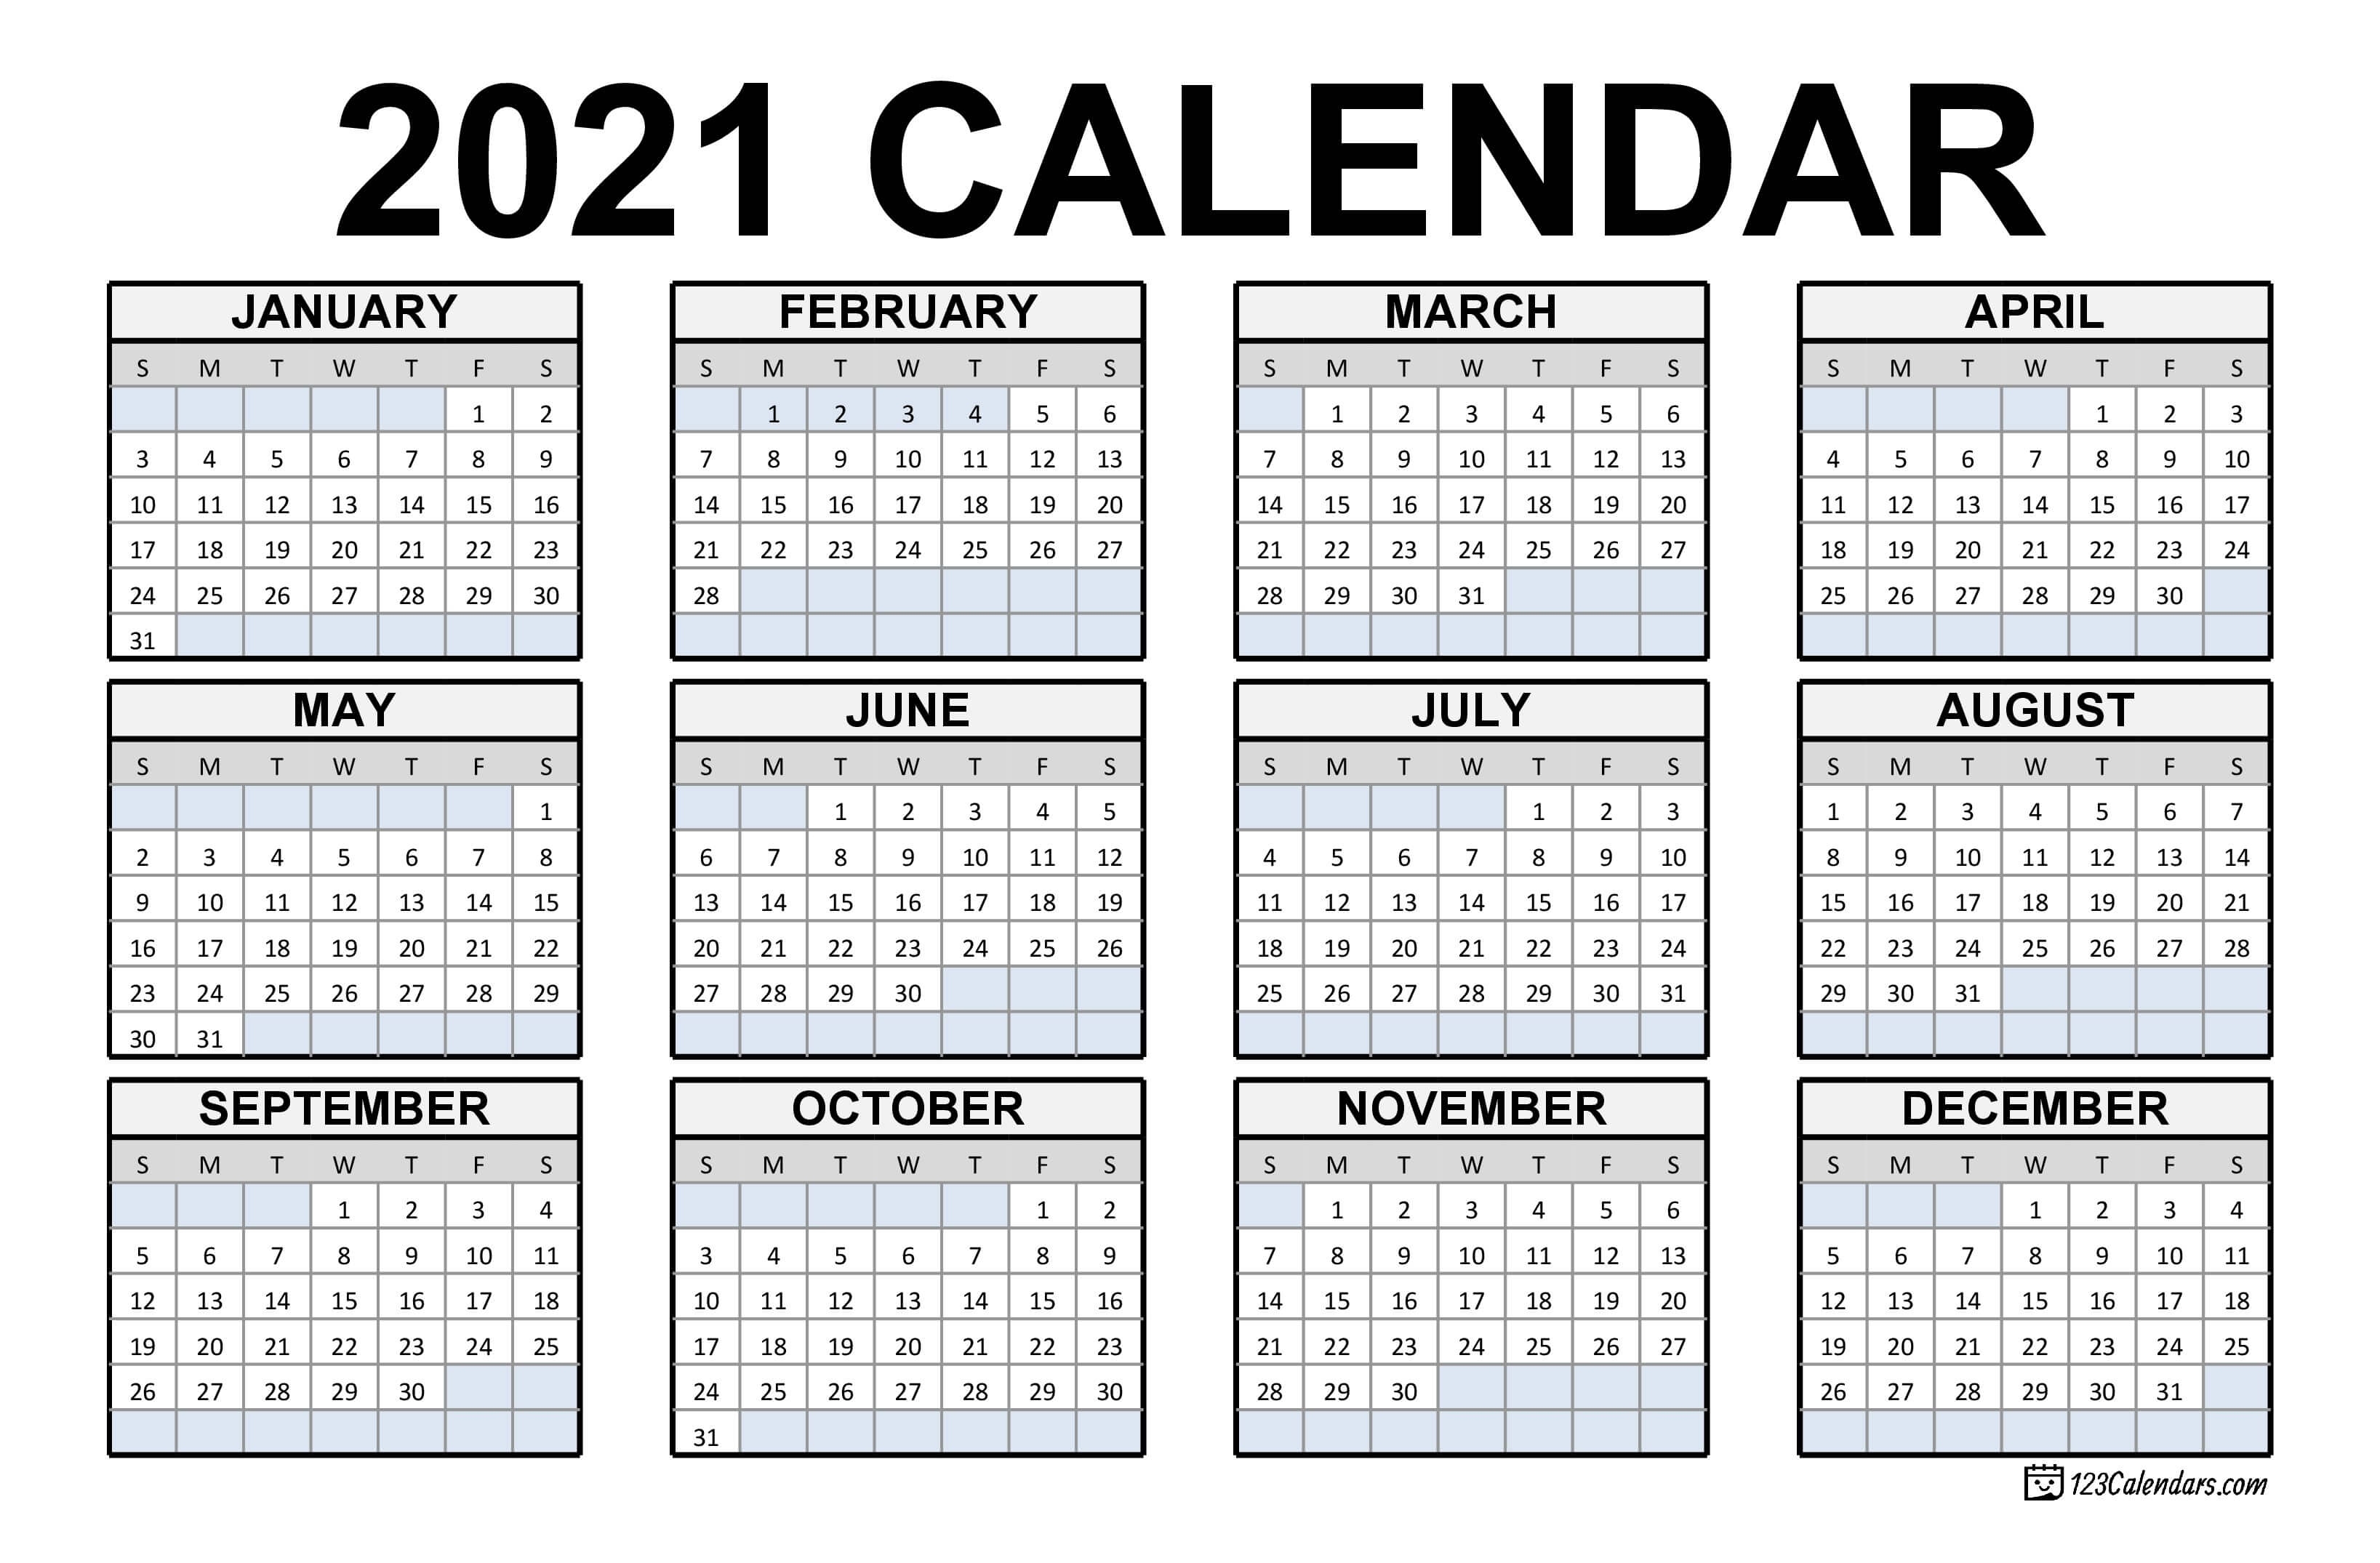 2021 Printable Calendar | 123Calendars Printable Calendar 2021 South Africa